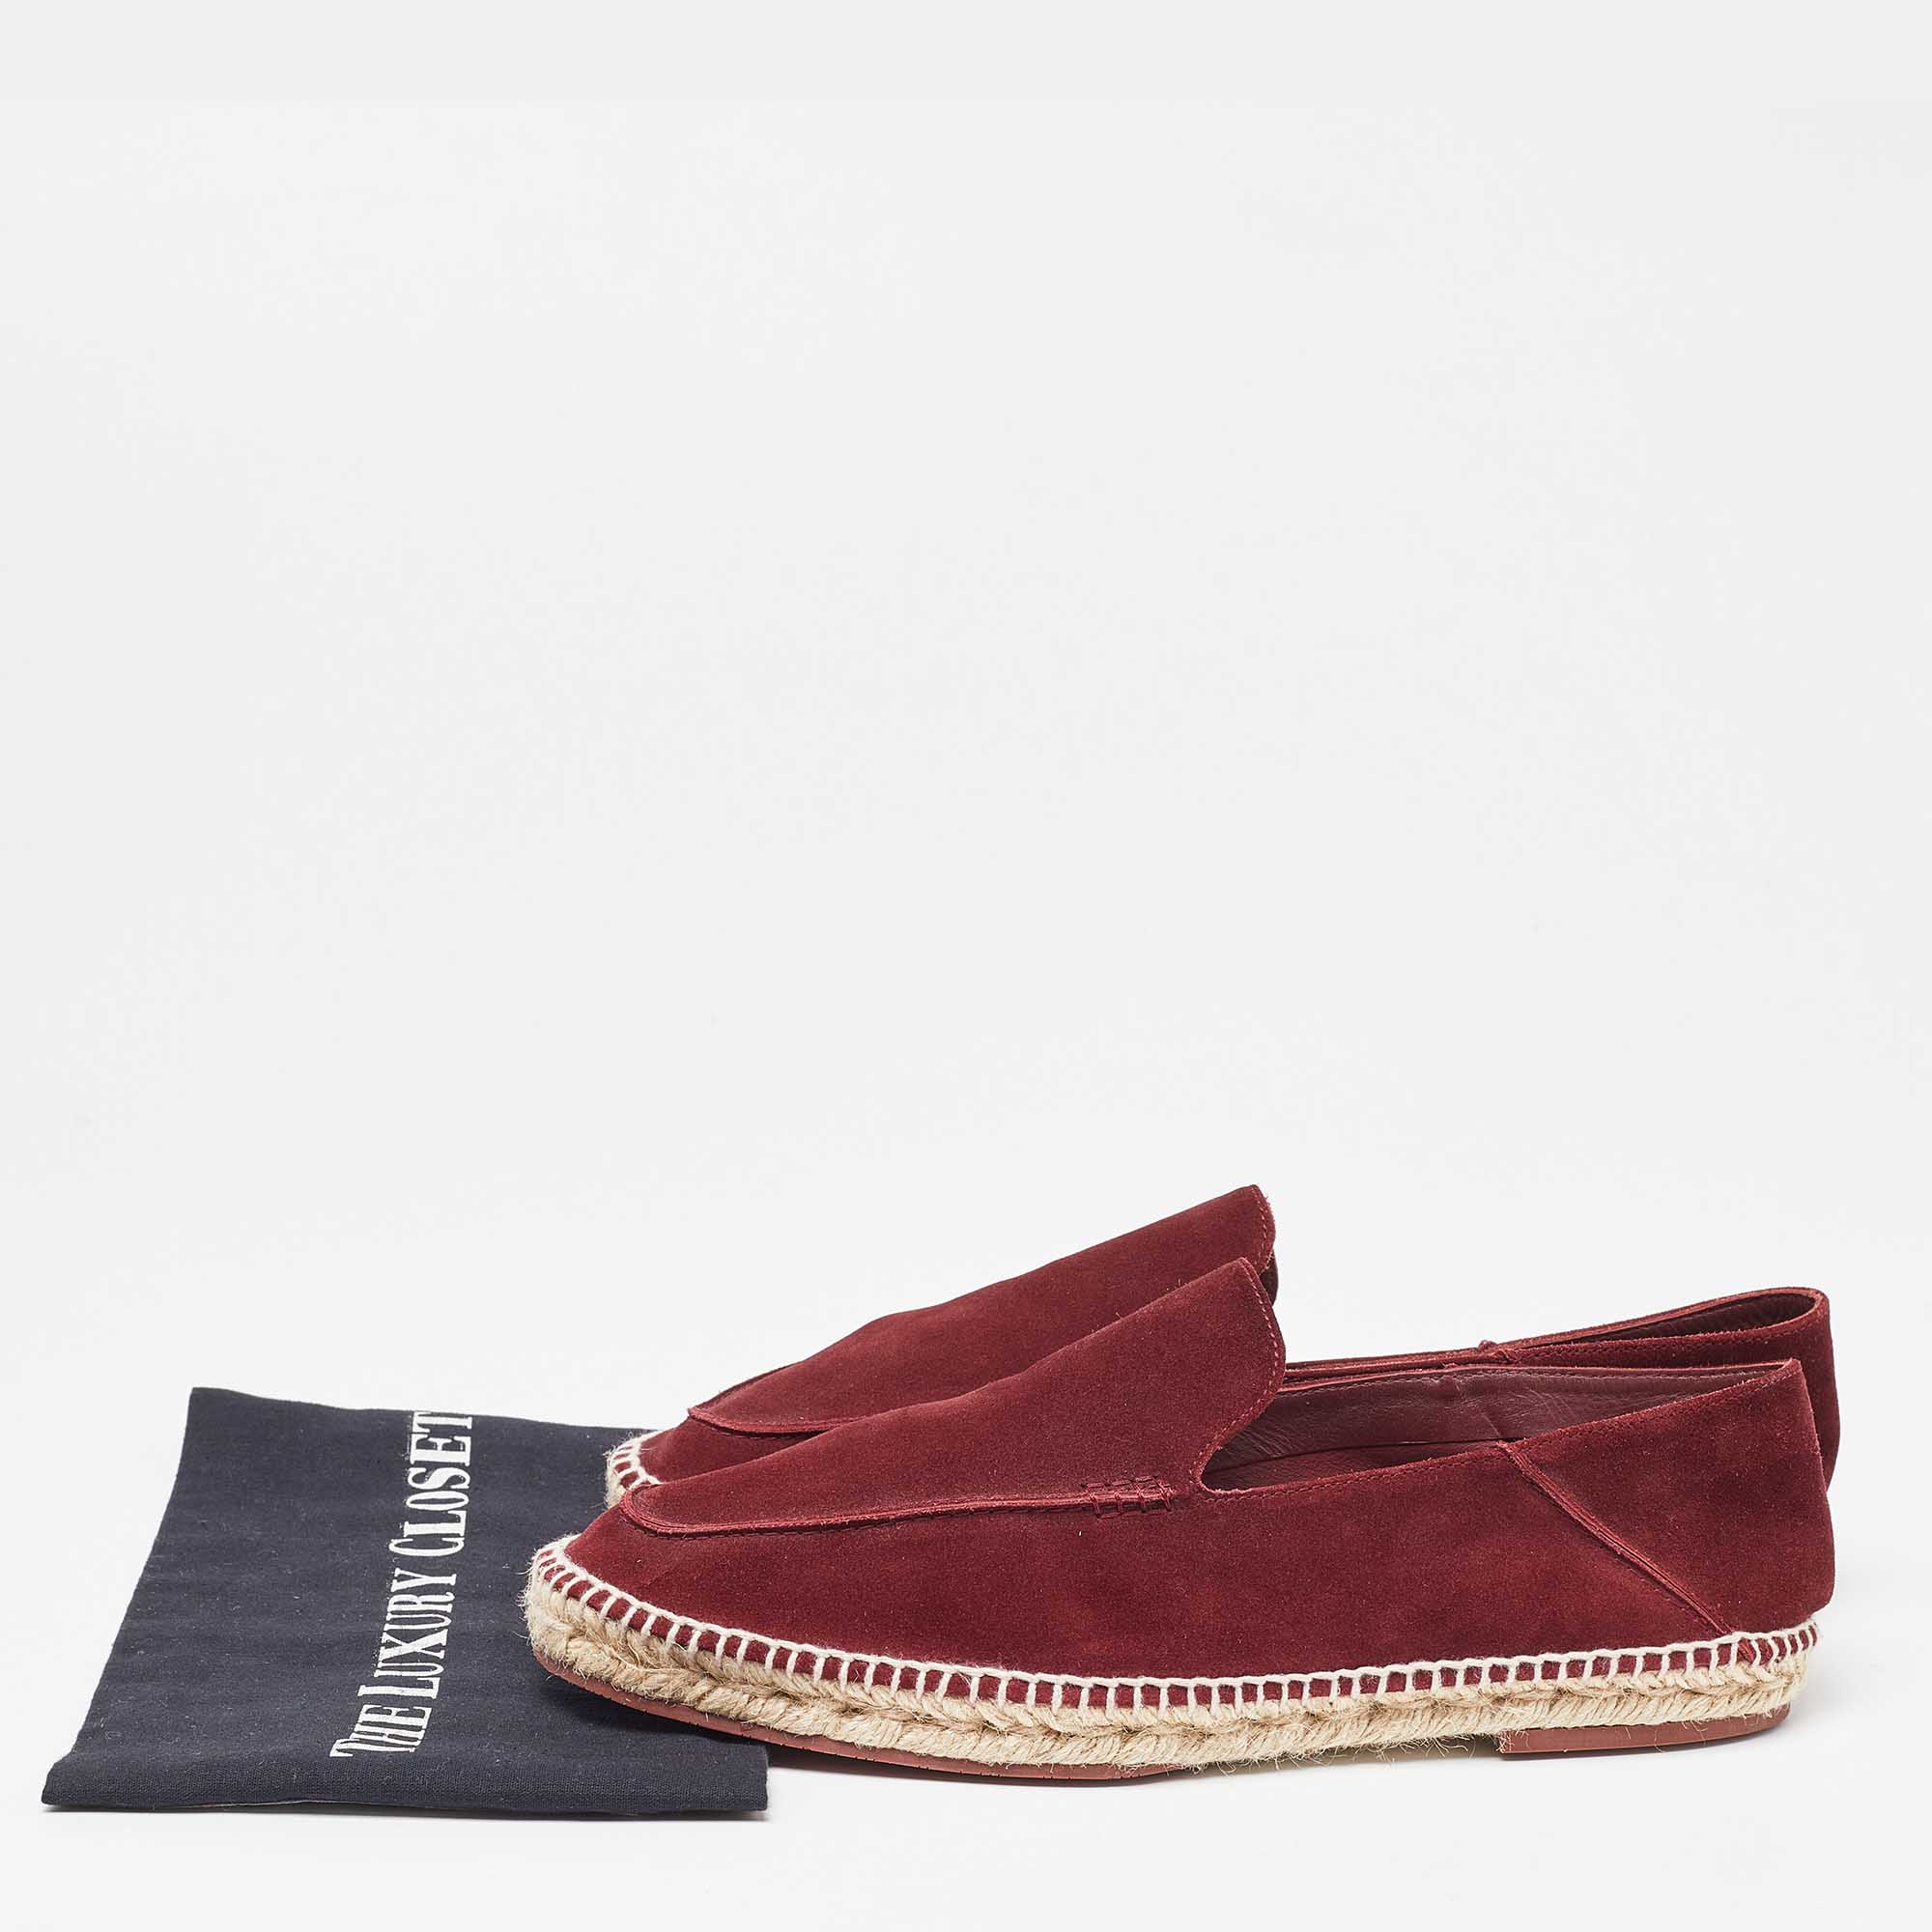 Loro Piana Burgundy Suede Collapsible Flat Espadrilles Size 45